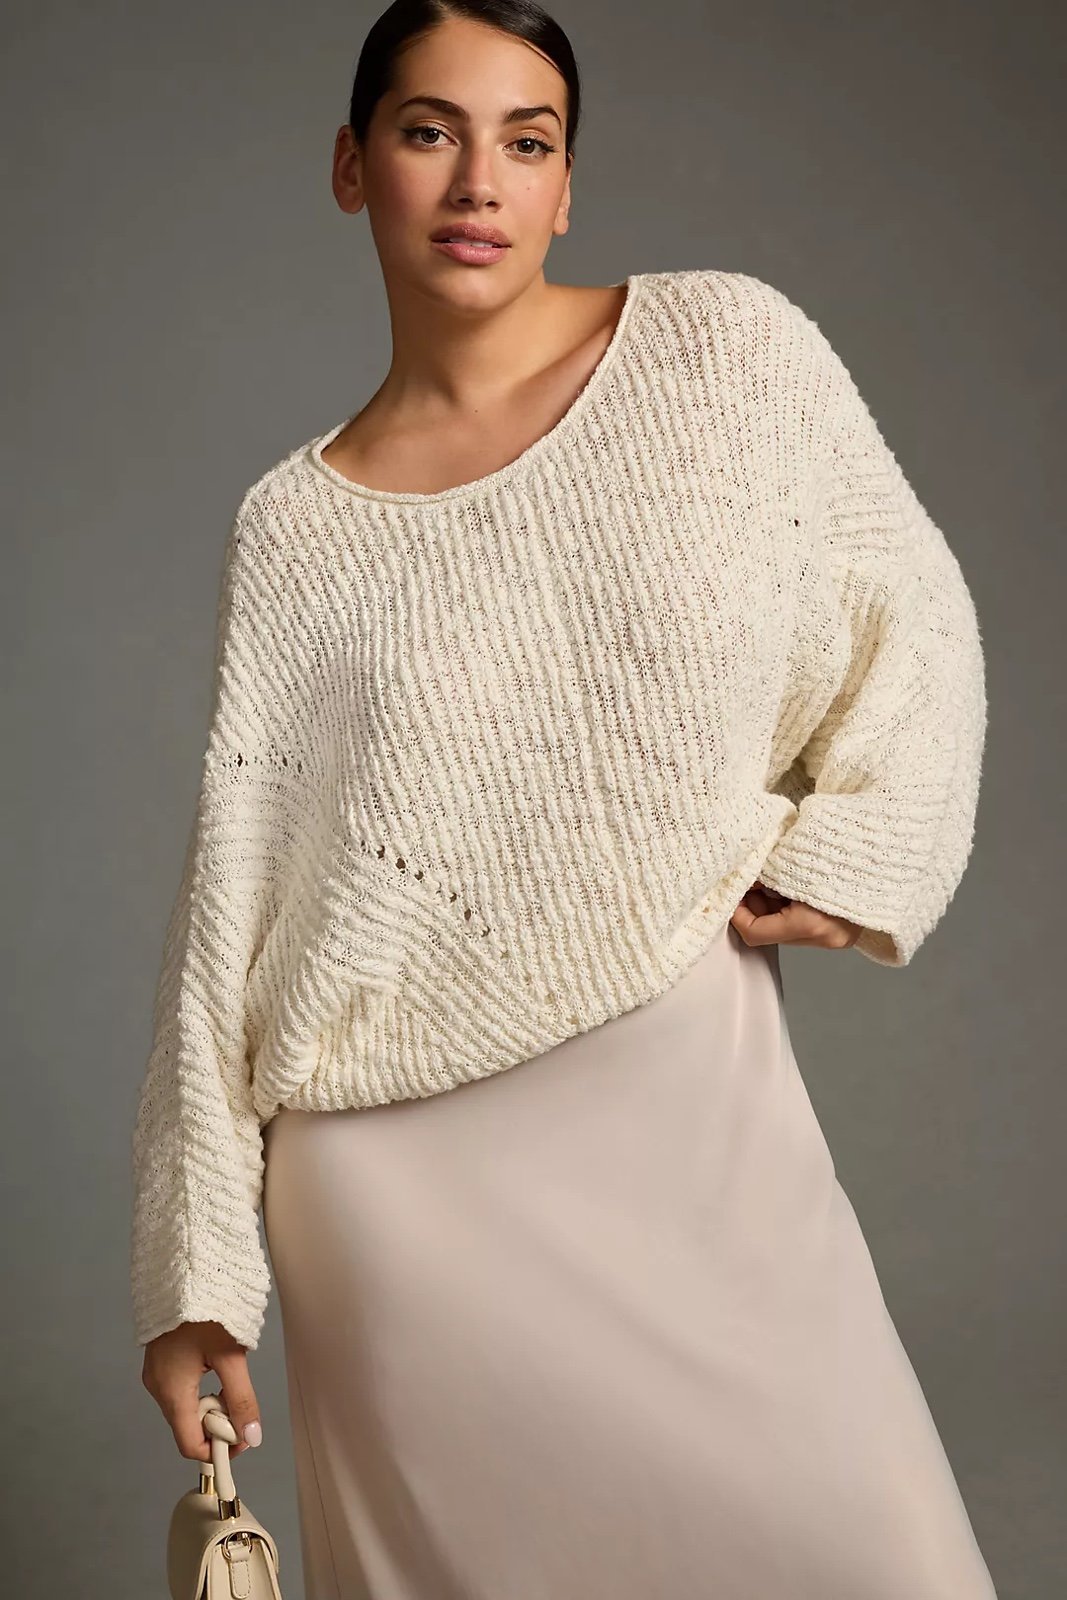 large selection NWT Anthropologie Crewneck Batwing Sweater, Ivory, Size XS O6cAE6wzS well sale